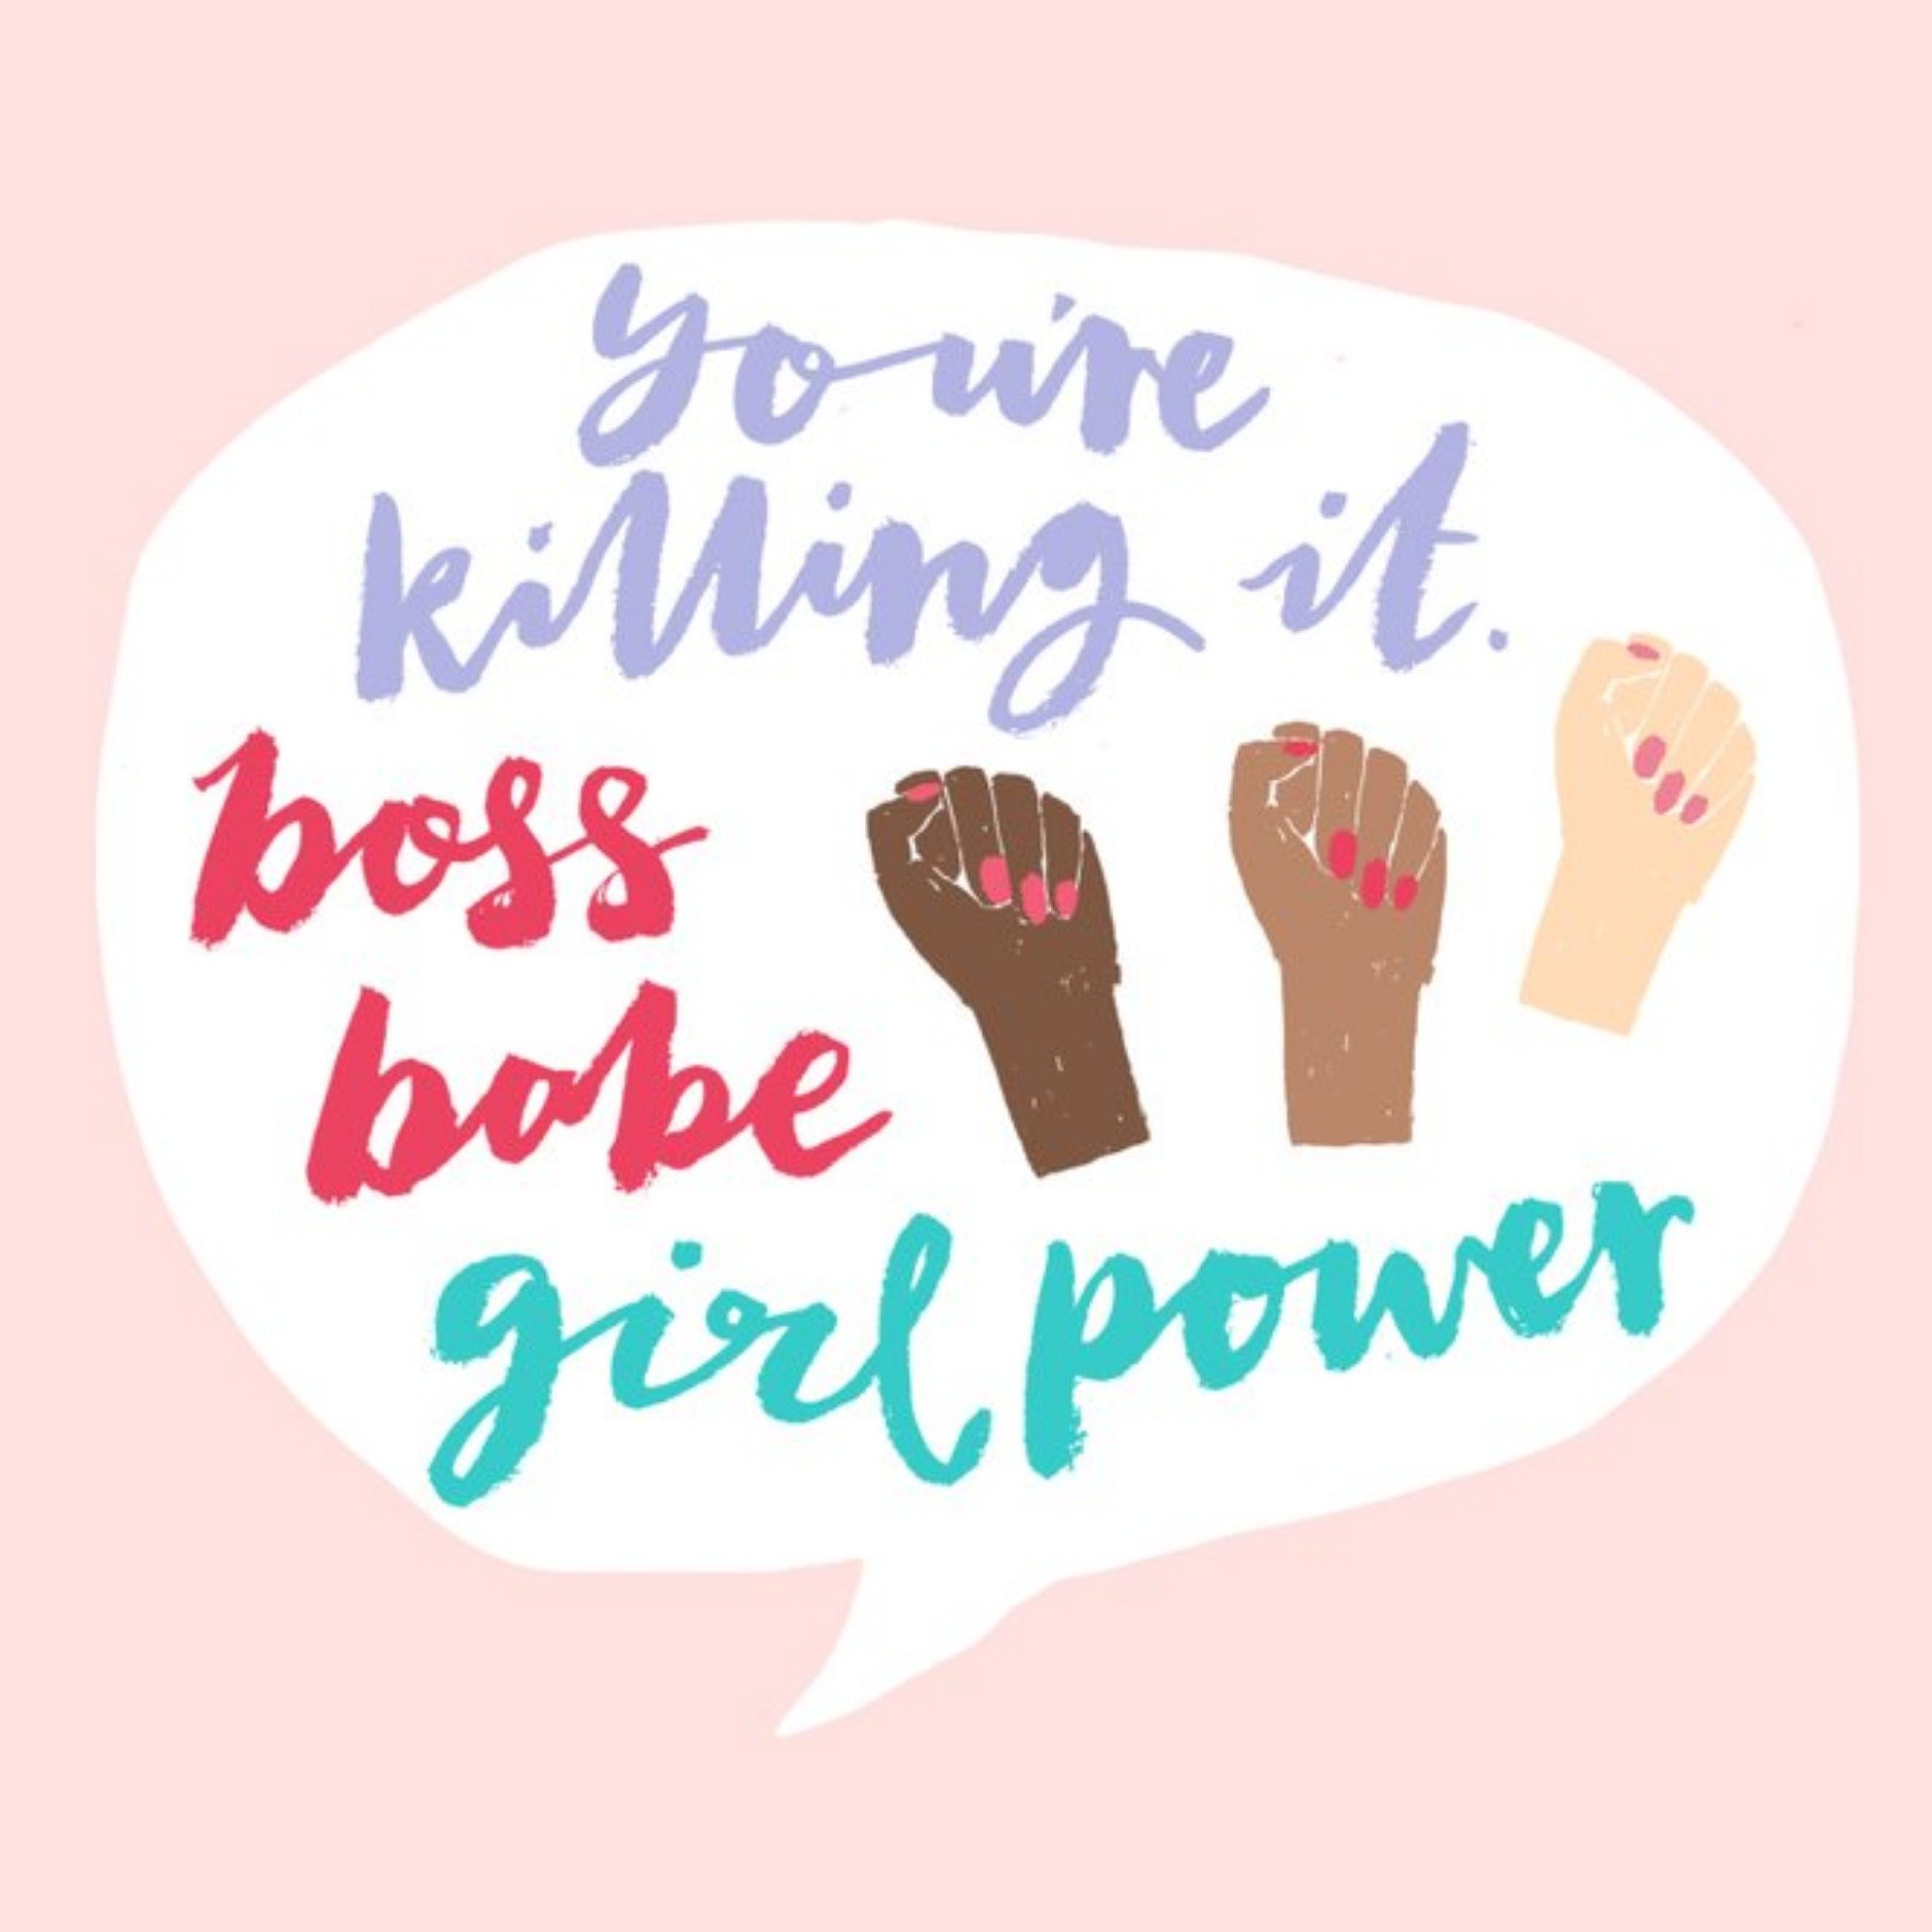 Moonpig Boss Babe Girl Power Just A Note Card For International Women's Day, Large